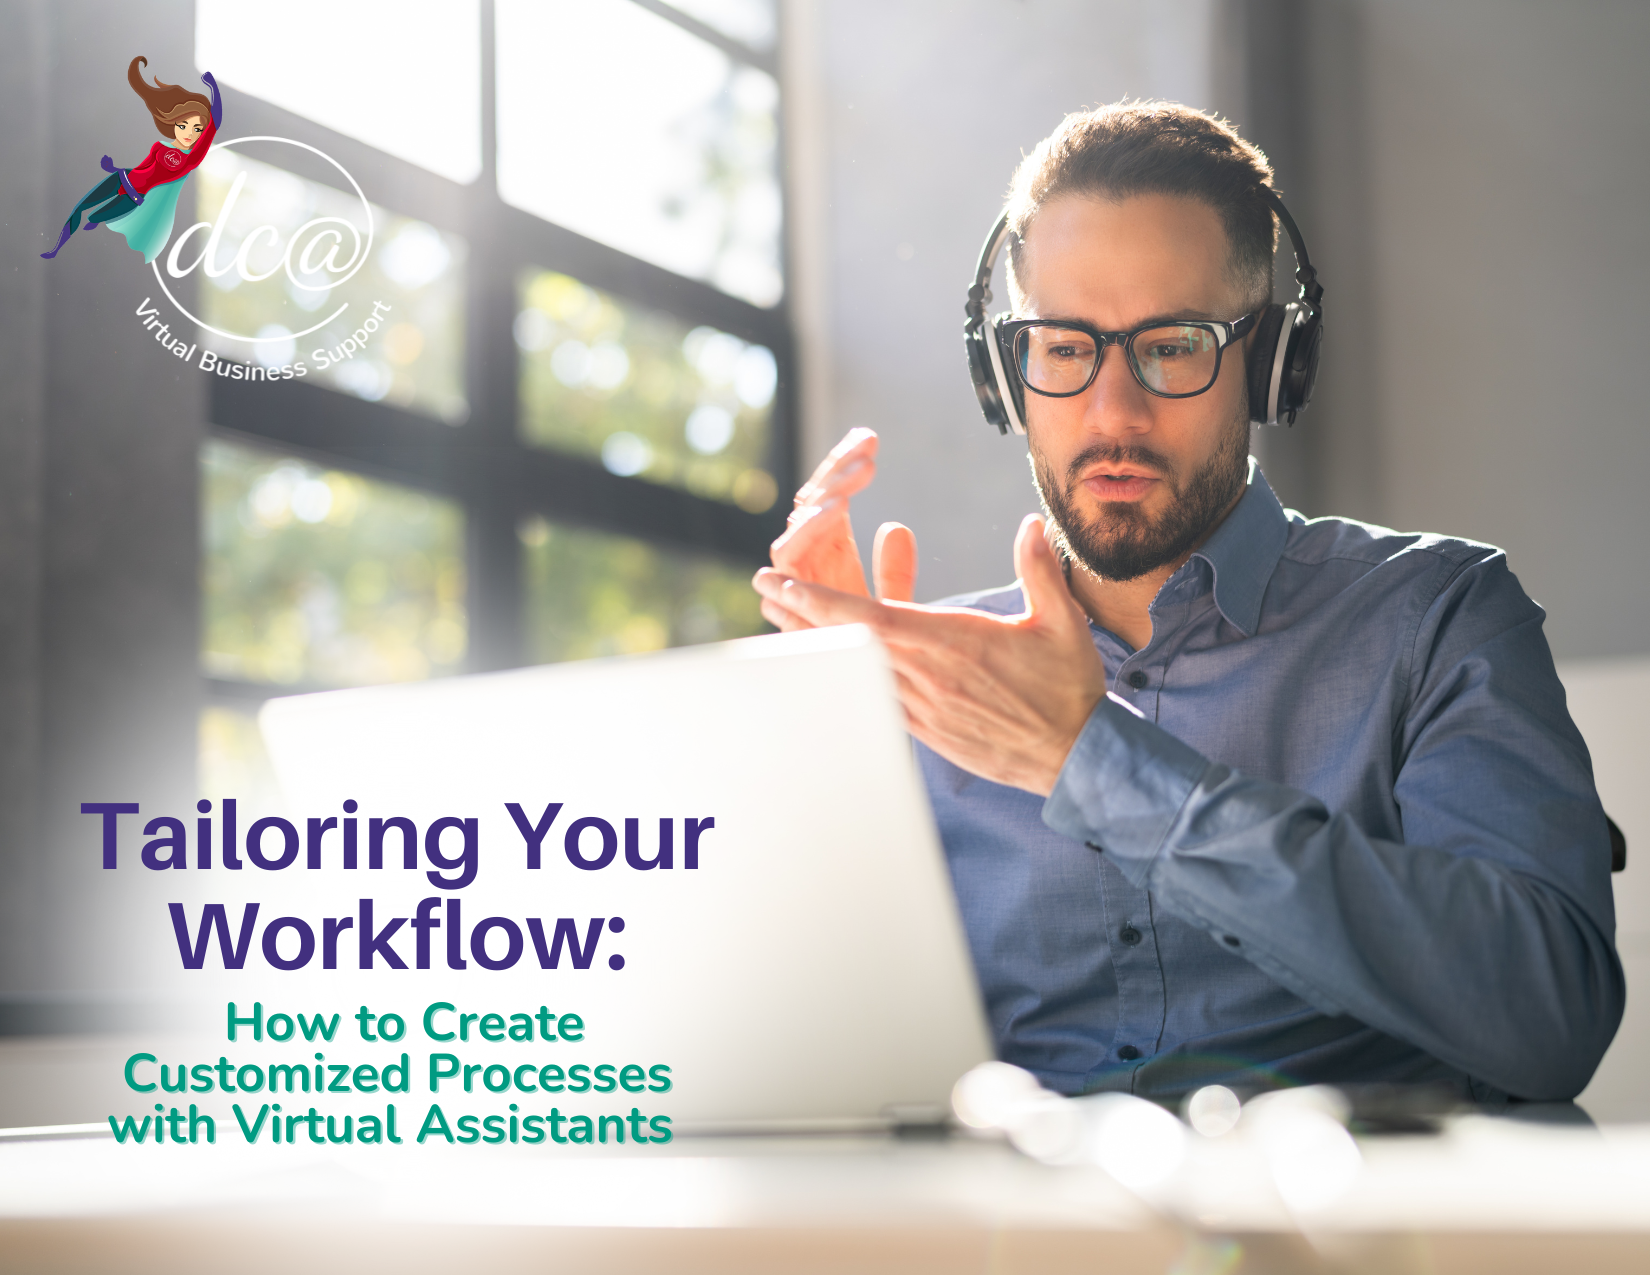 Virtual Assistant tailoring workflow processes